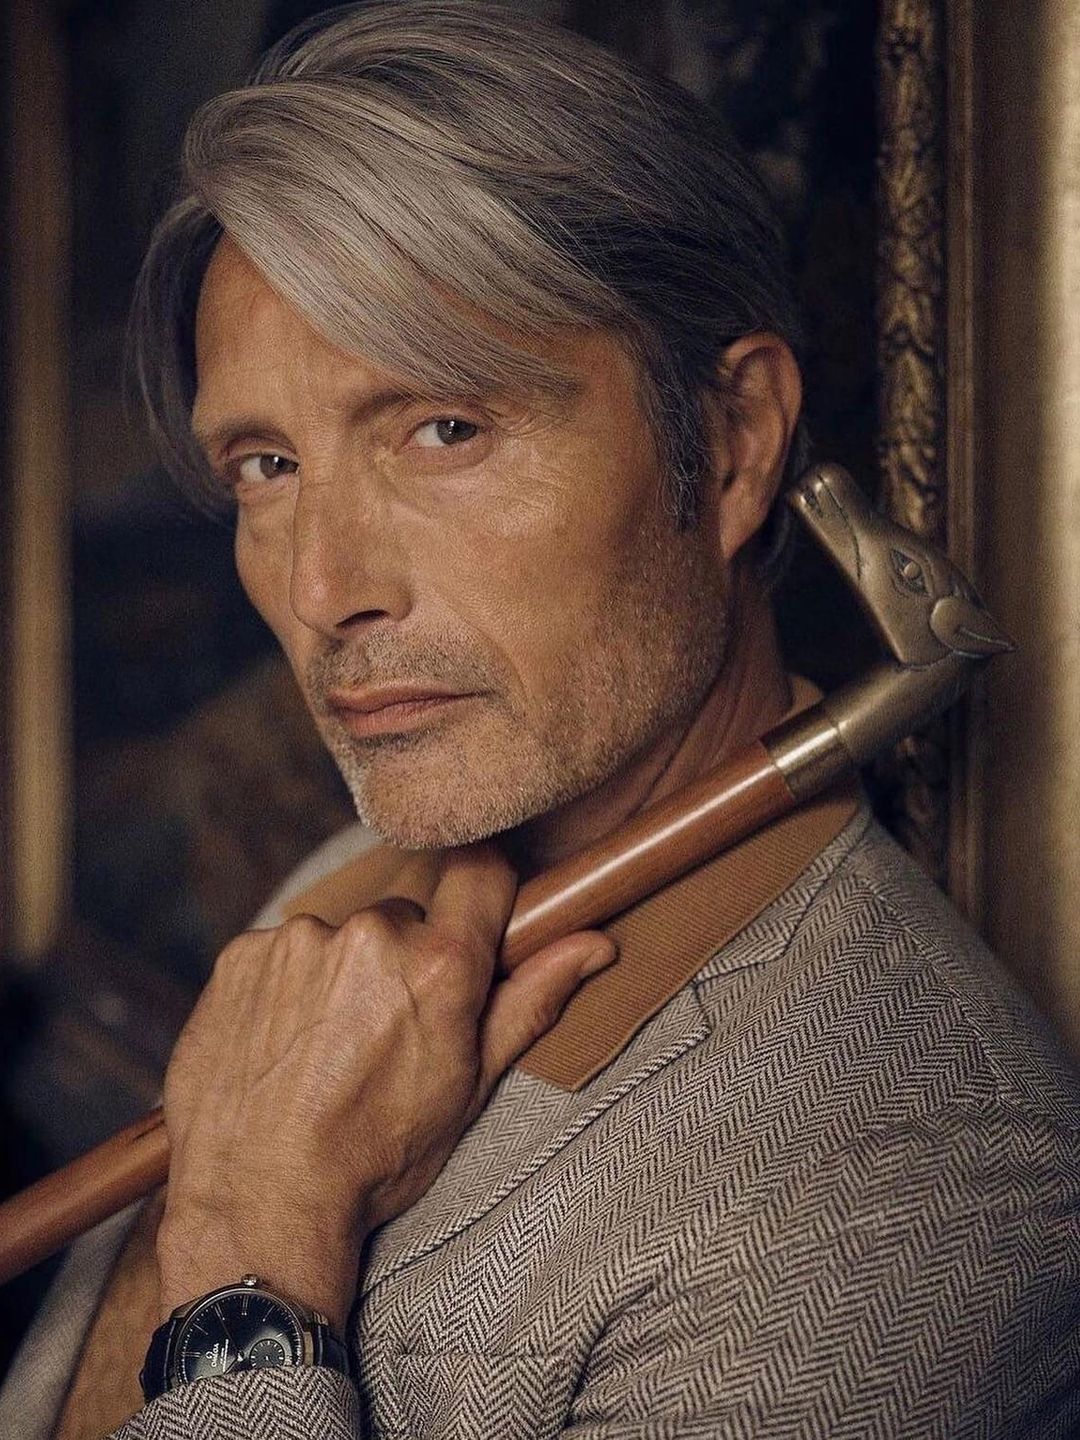 Mads Mikkelsen young photos